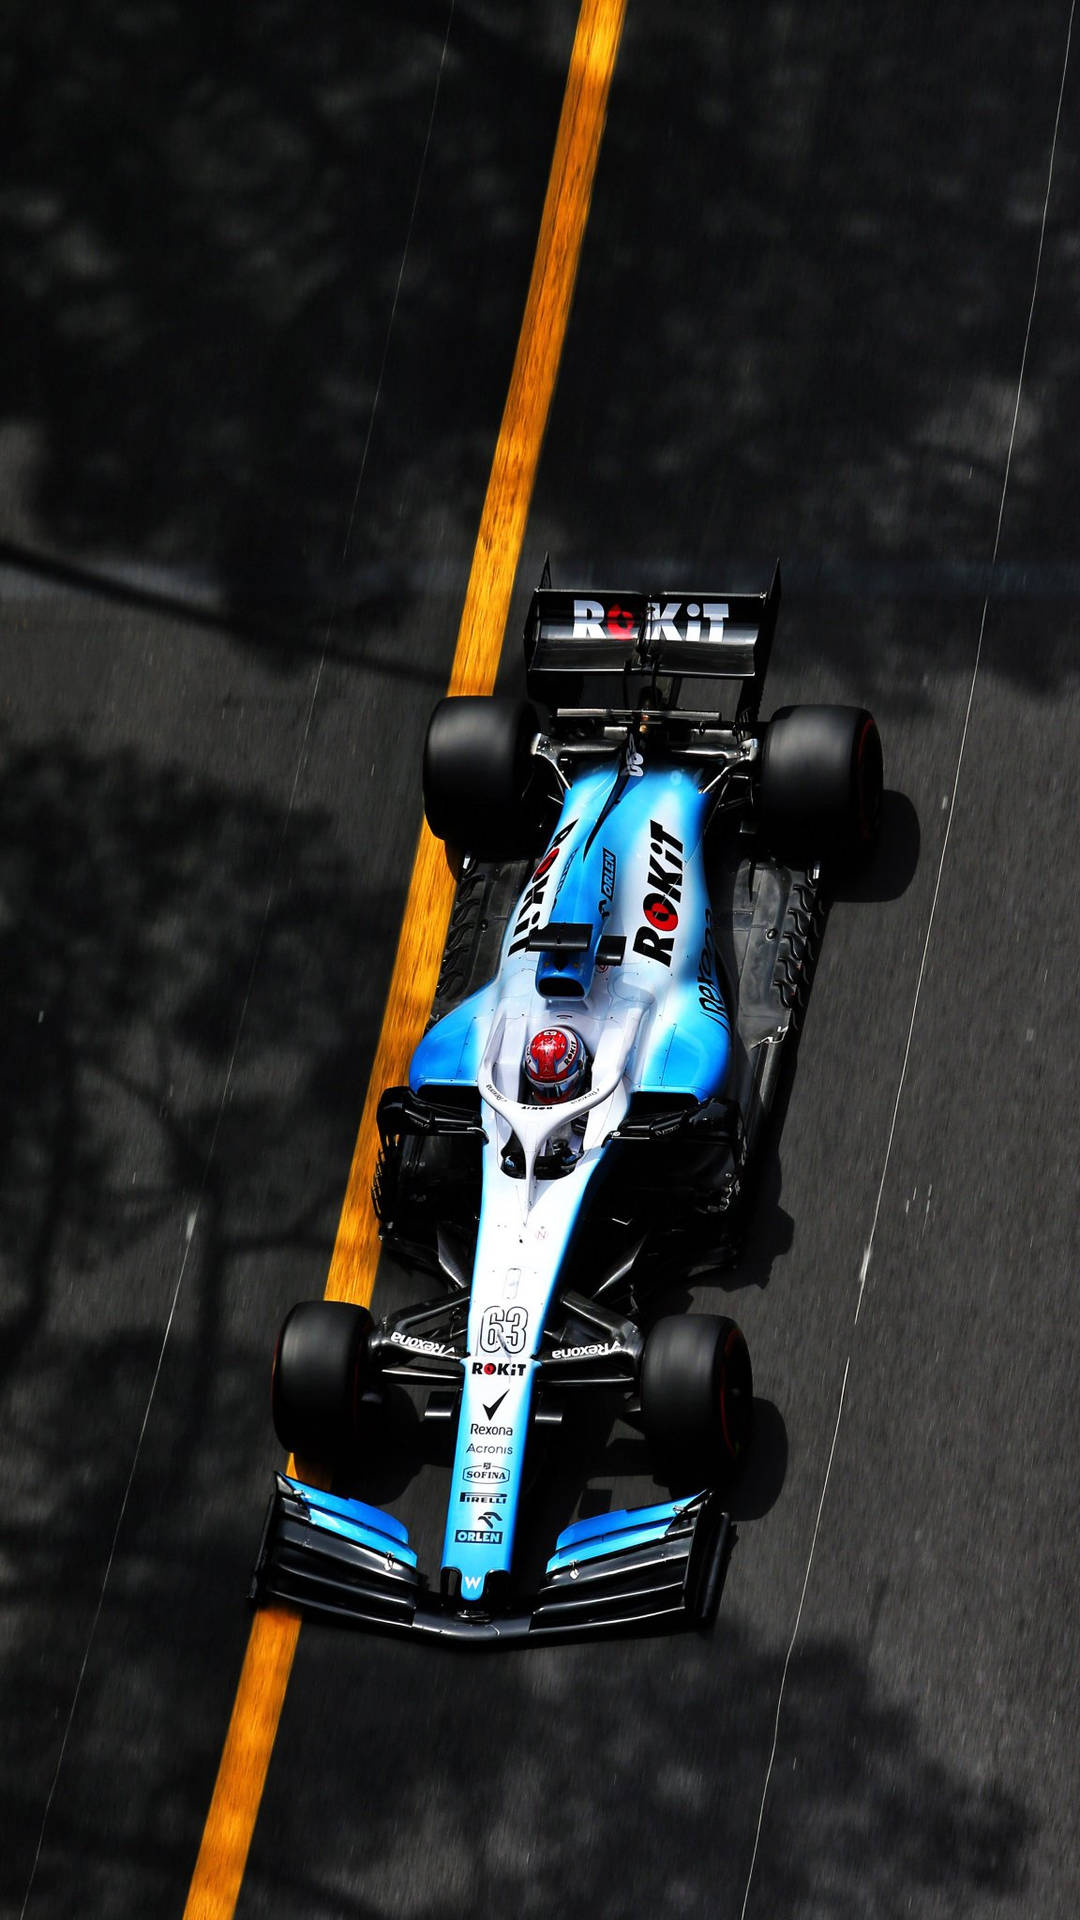 Williams Car In Middle Of Road Wallpaper